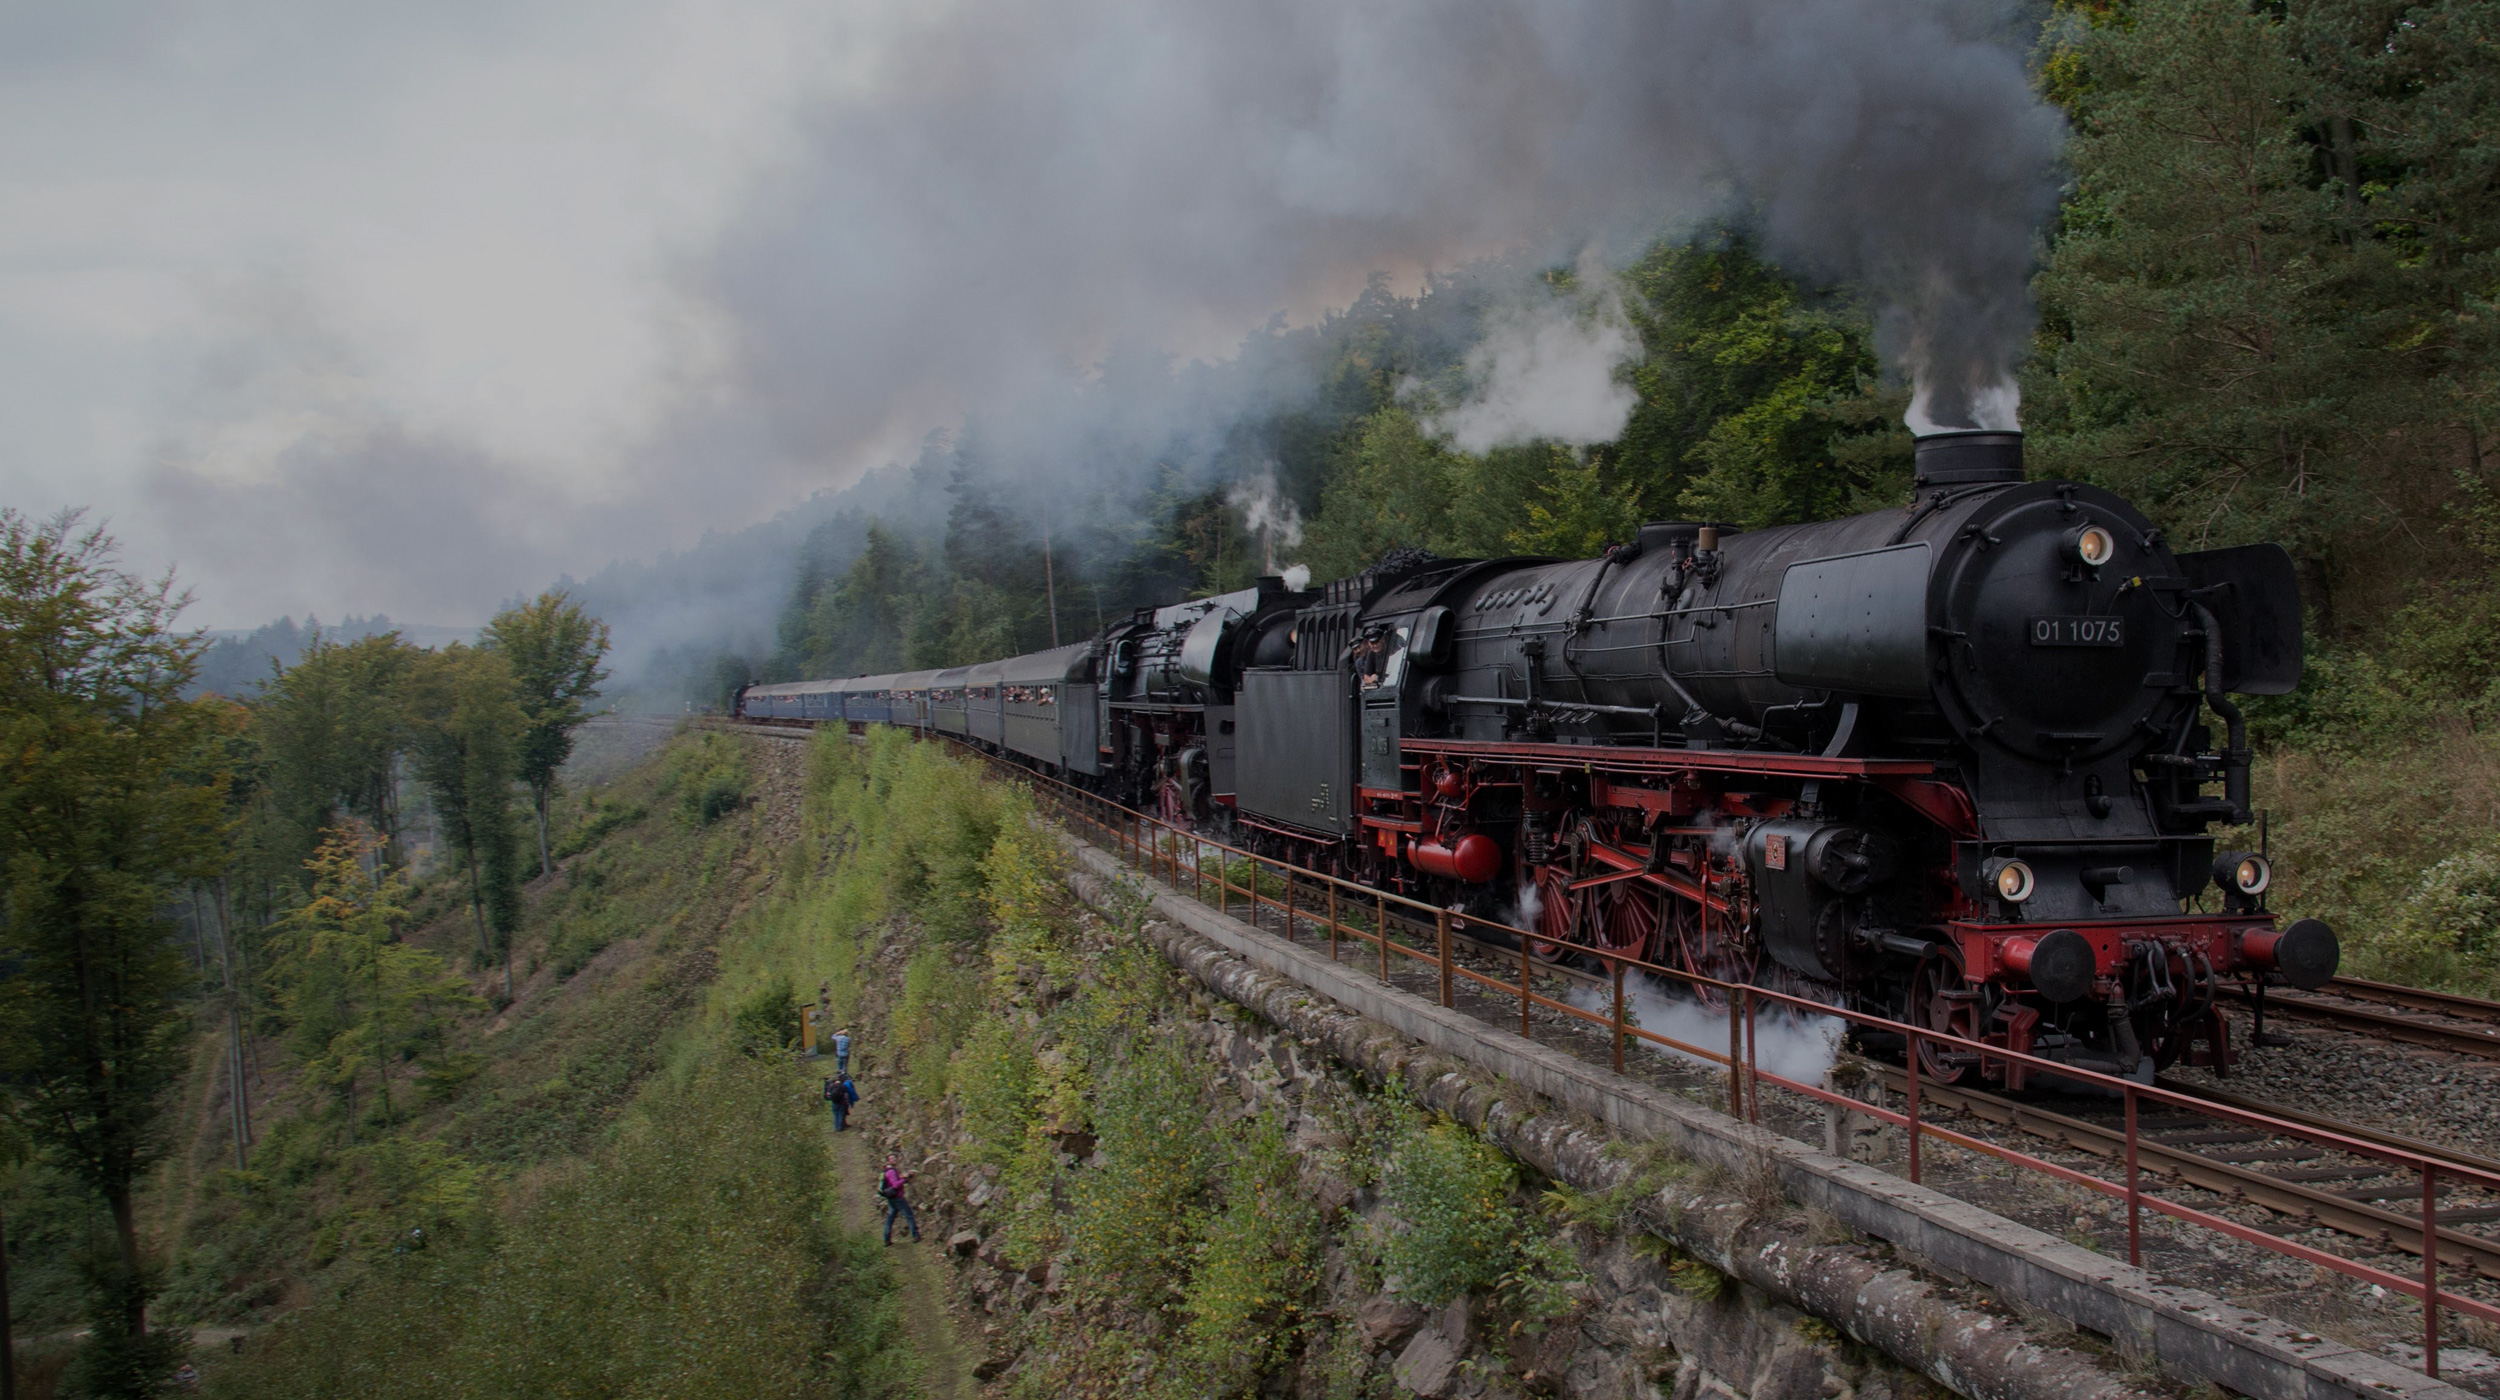 A steam locomotive goes up the Schiefe Ebene